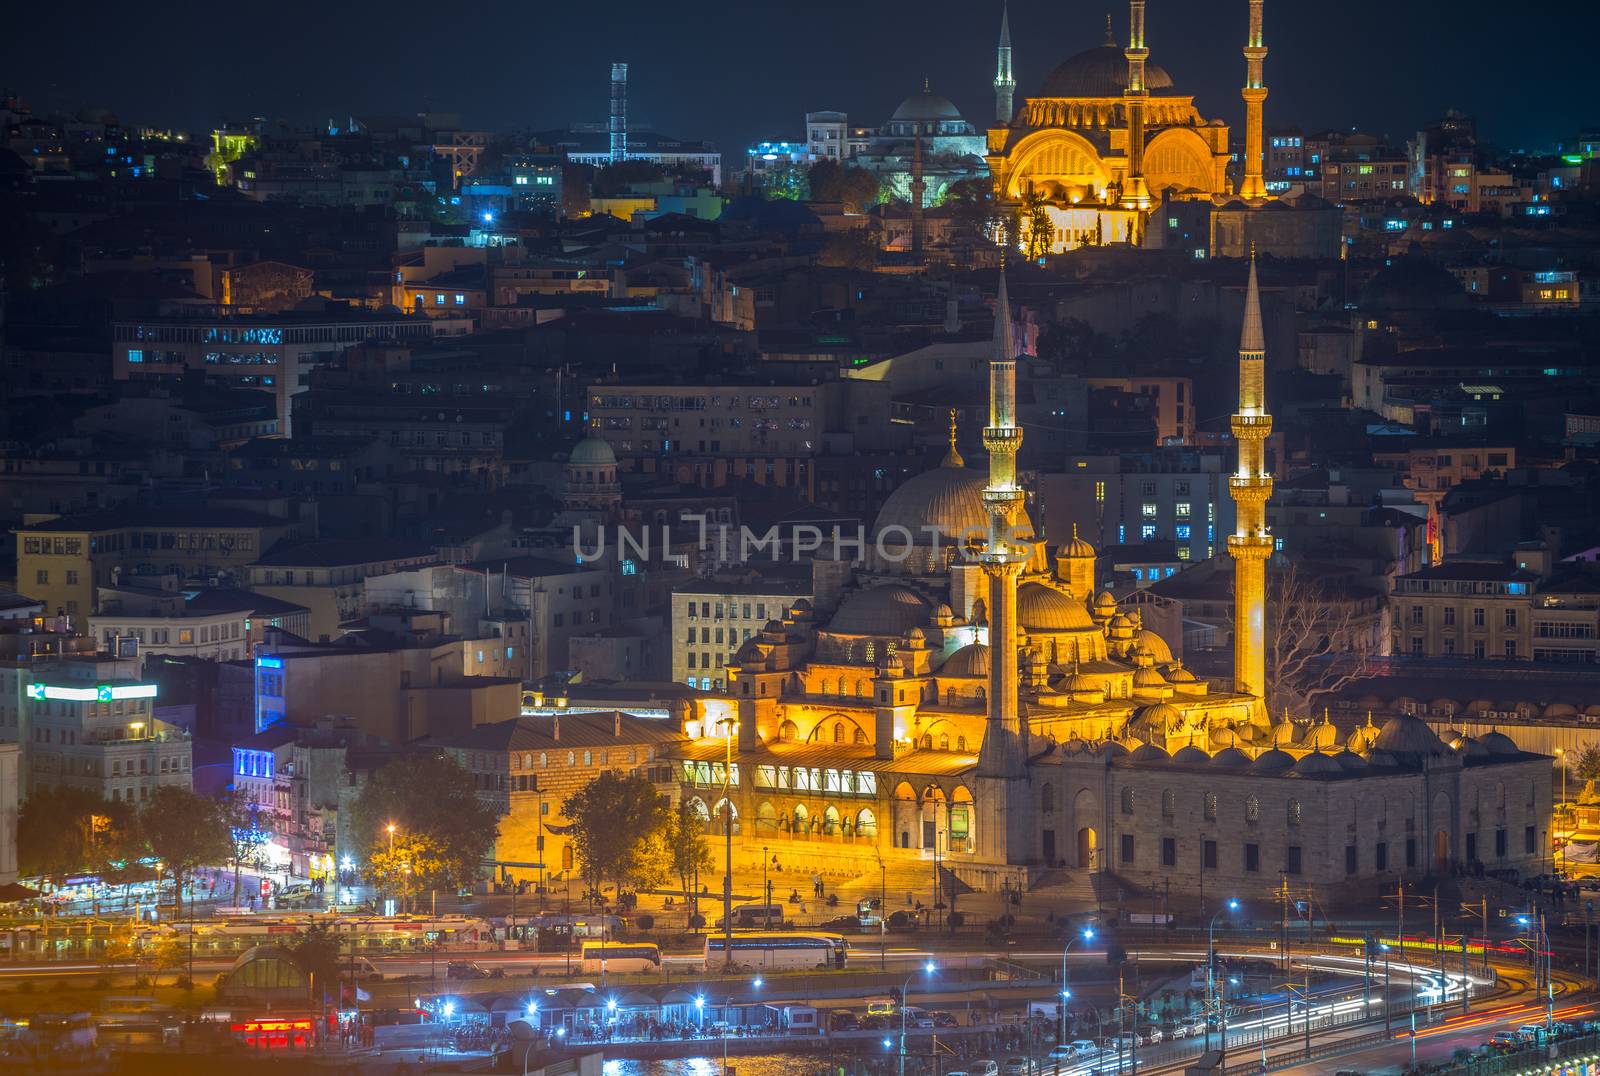 Yeni Cami, New Mosque. Istanbul night aerial view.